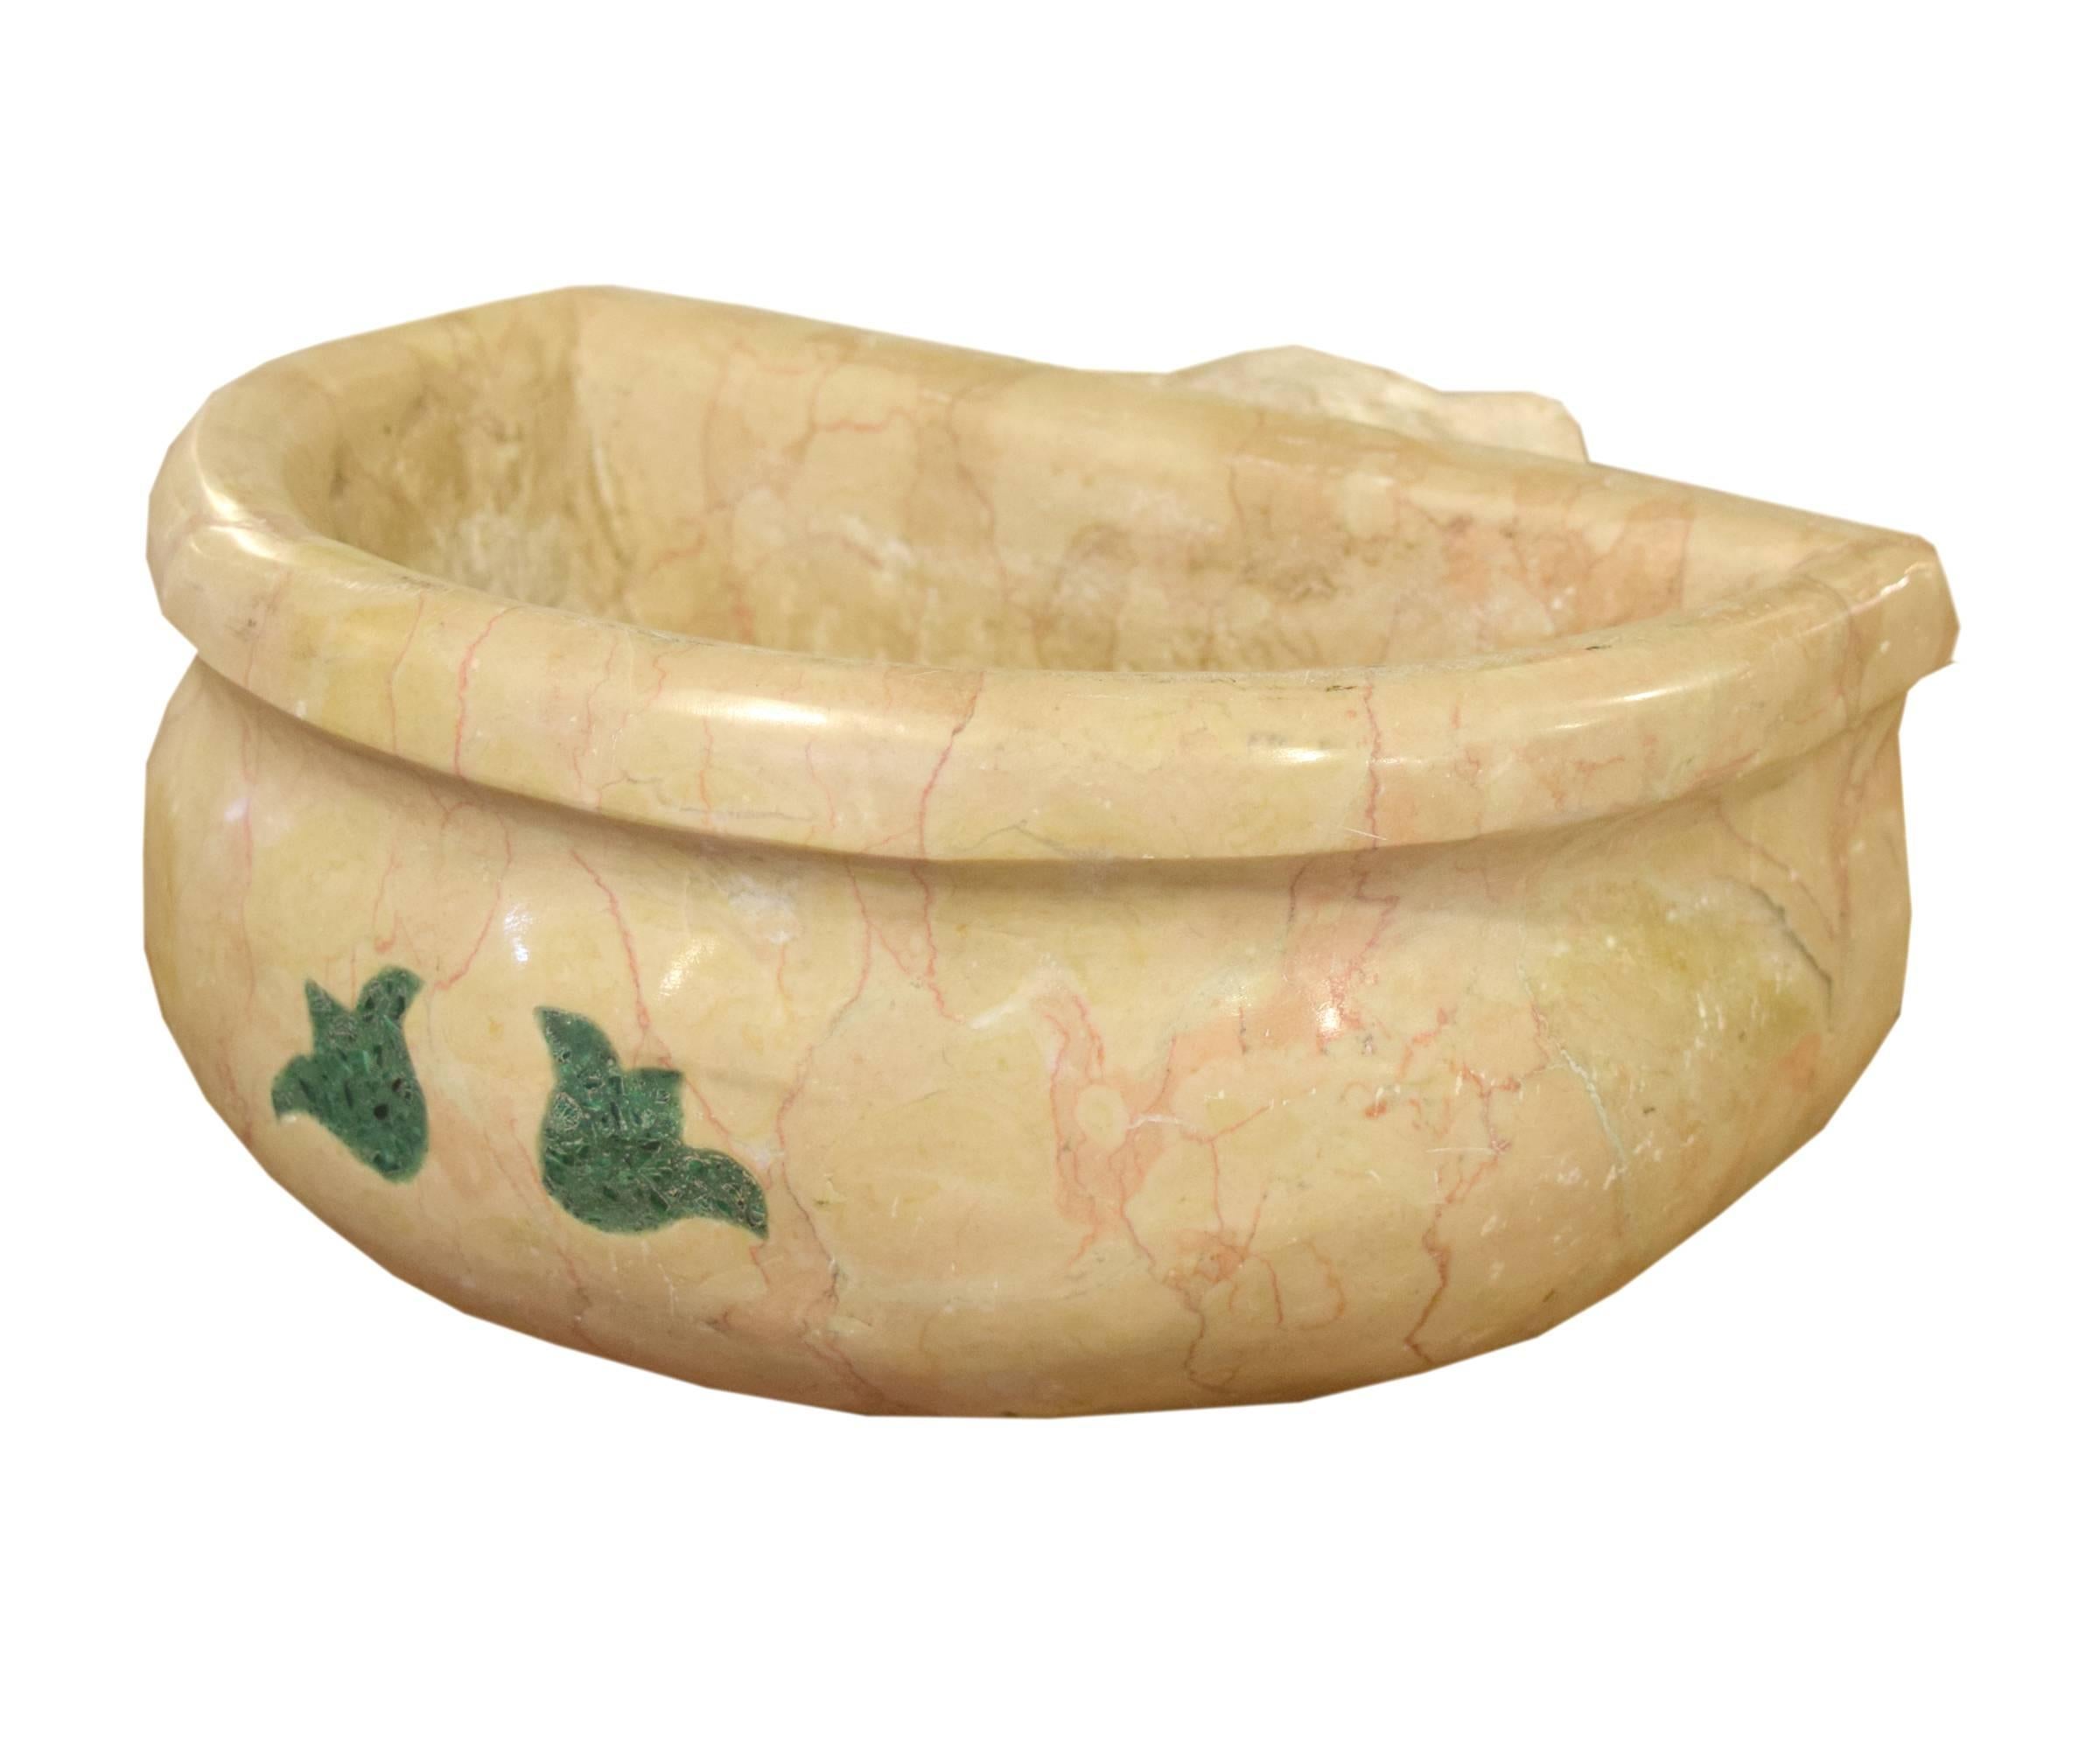 A carved marble wall mount font from Italy. This 19th century holy water font has a green stone inlay depicting two flowers.